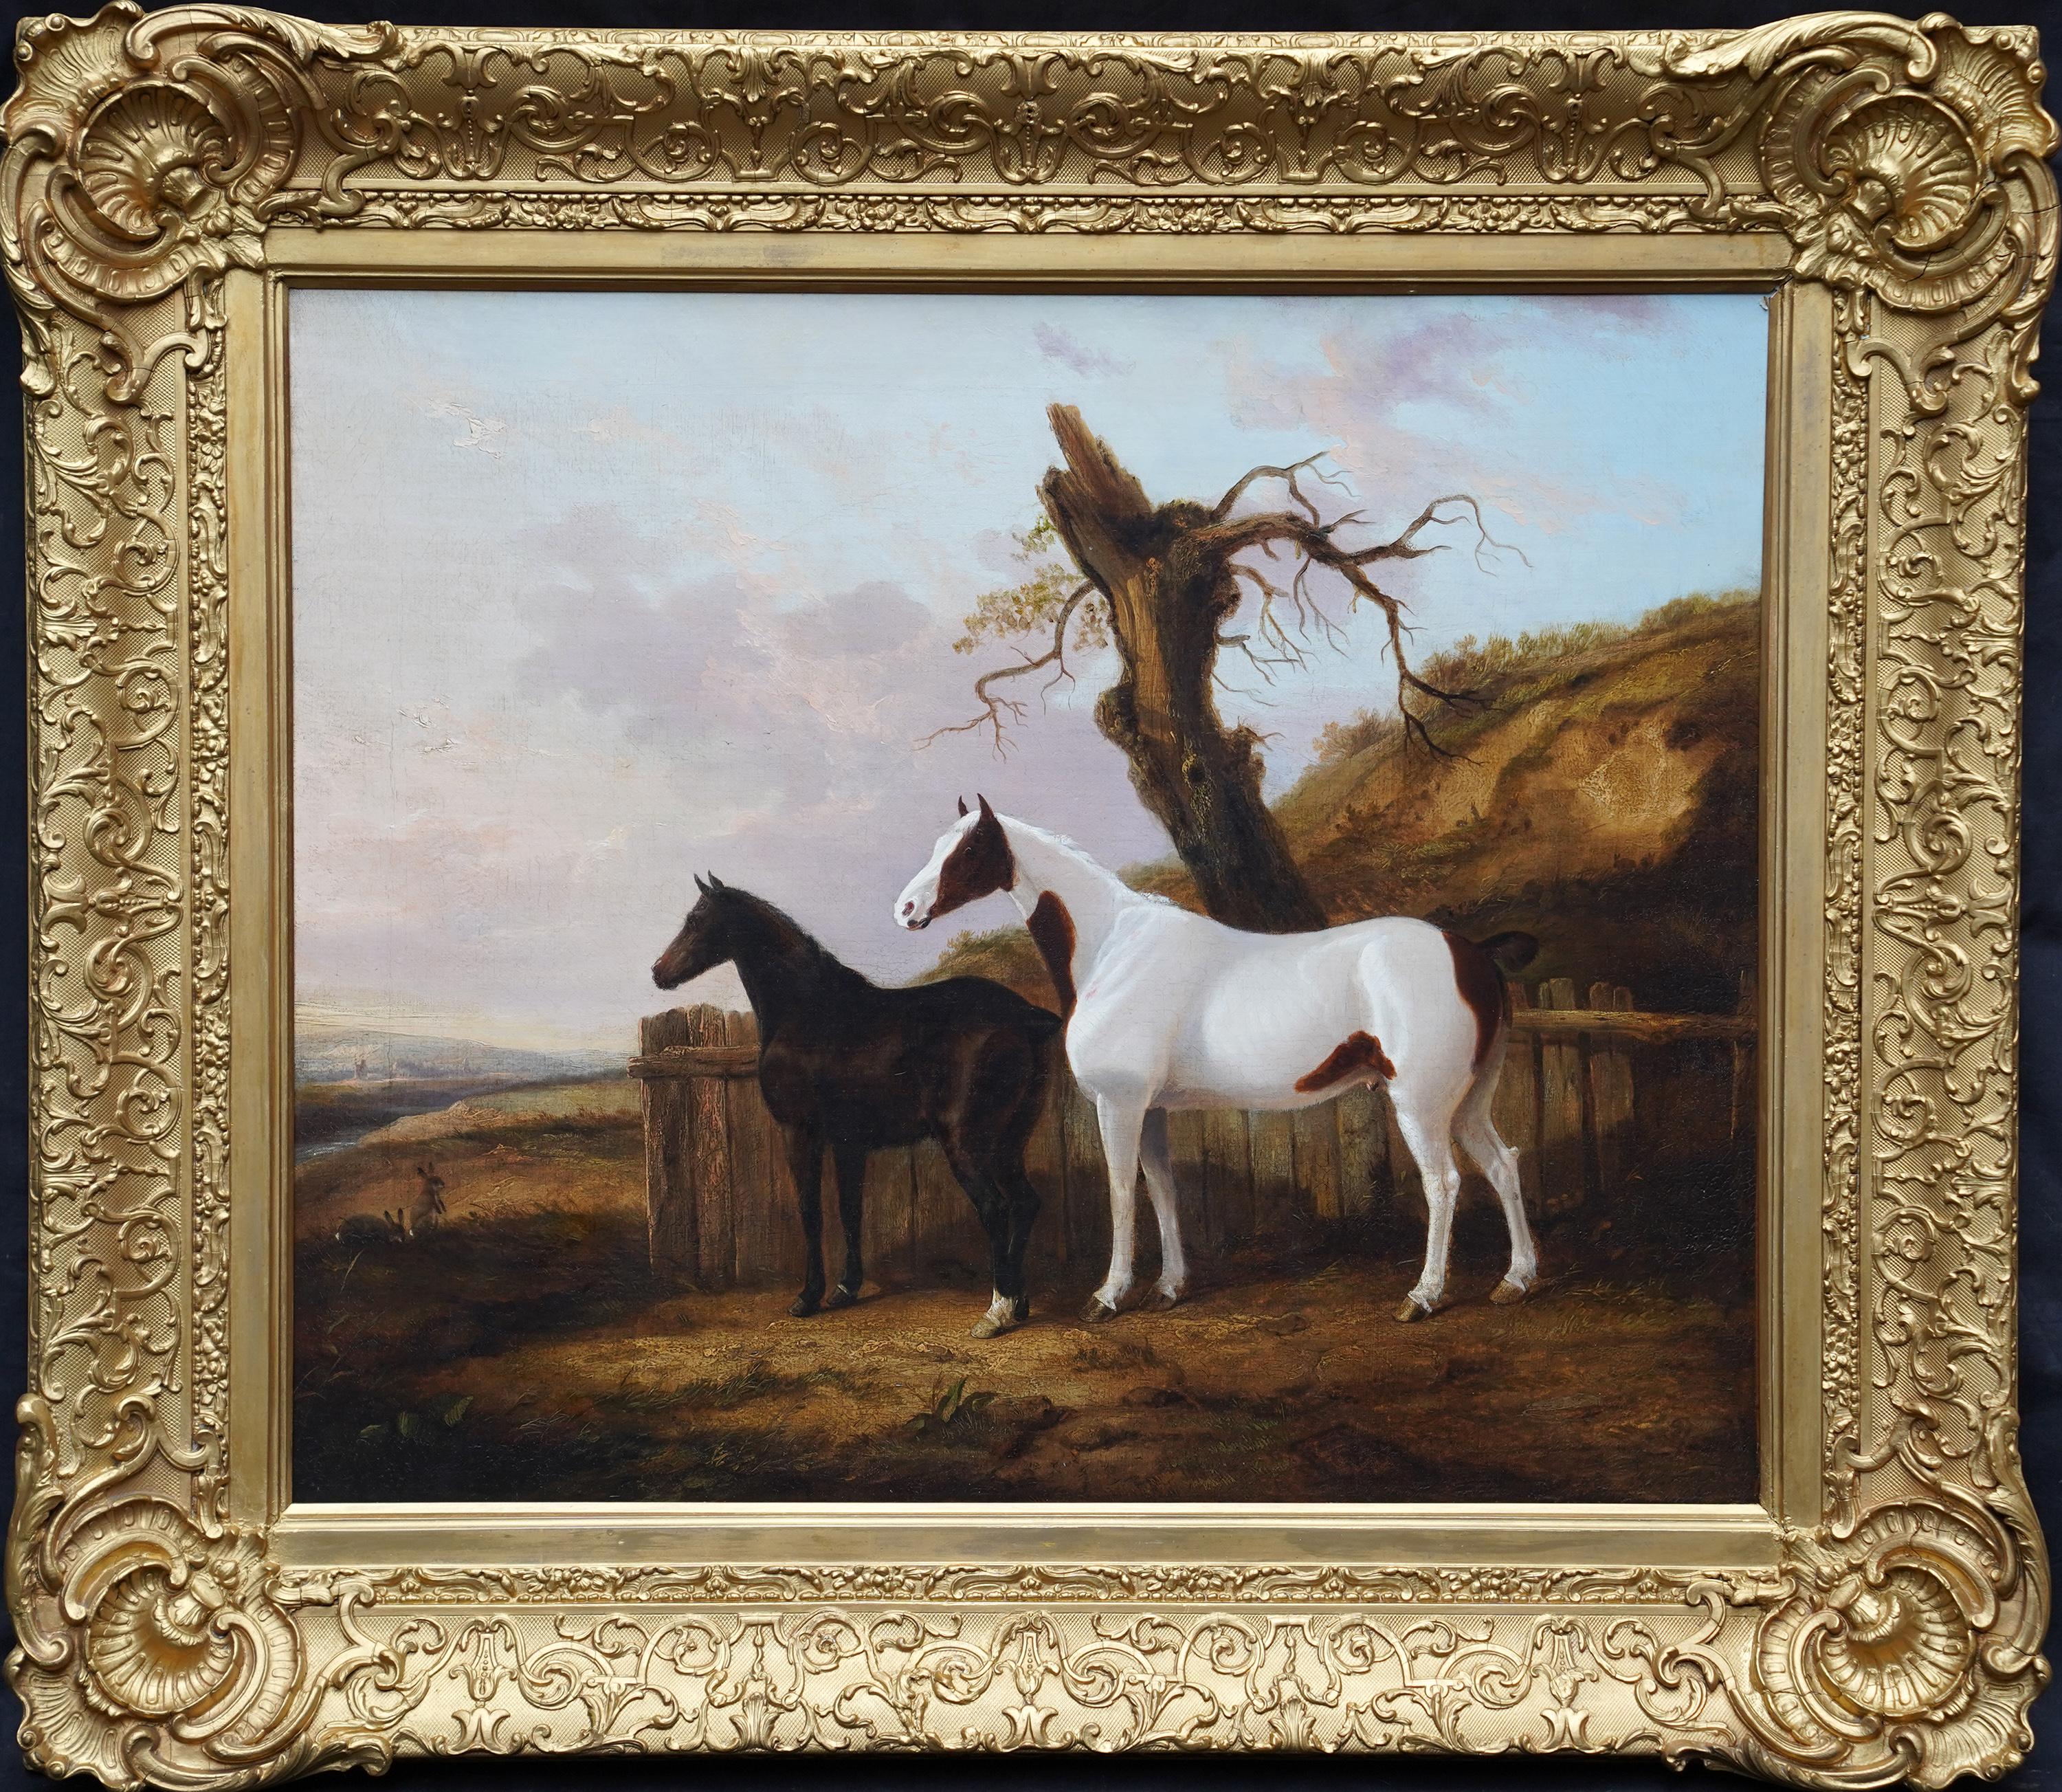 Portrait of Two Horses in a Landscape - British 19thC equine art oil painting